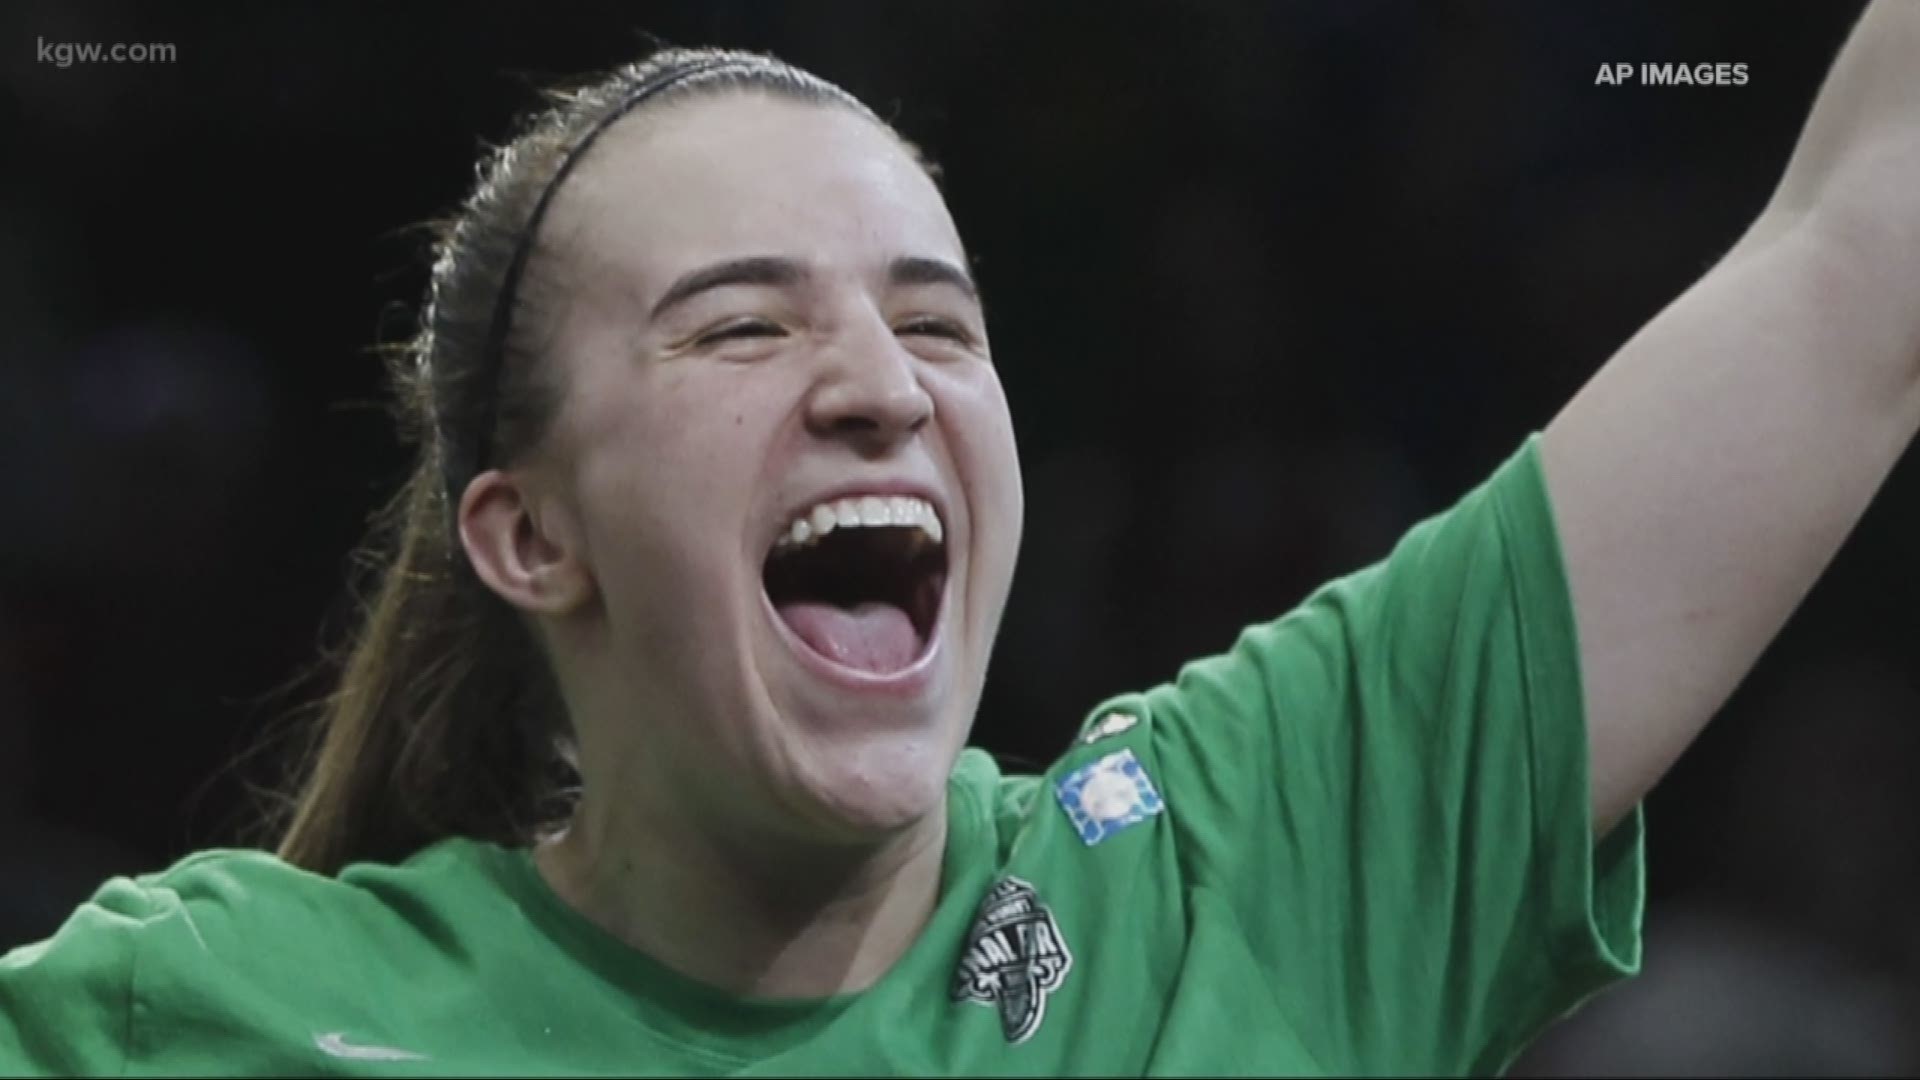 If you don’t know the name Sabrina Ionescu, you should! She is college basketball’s biggest star right now and she plays for the Oregon Ducks.